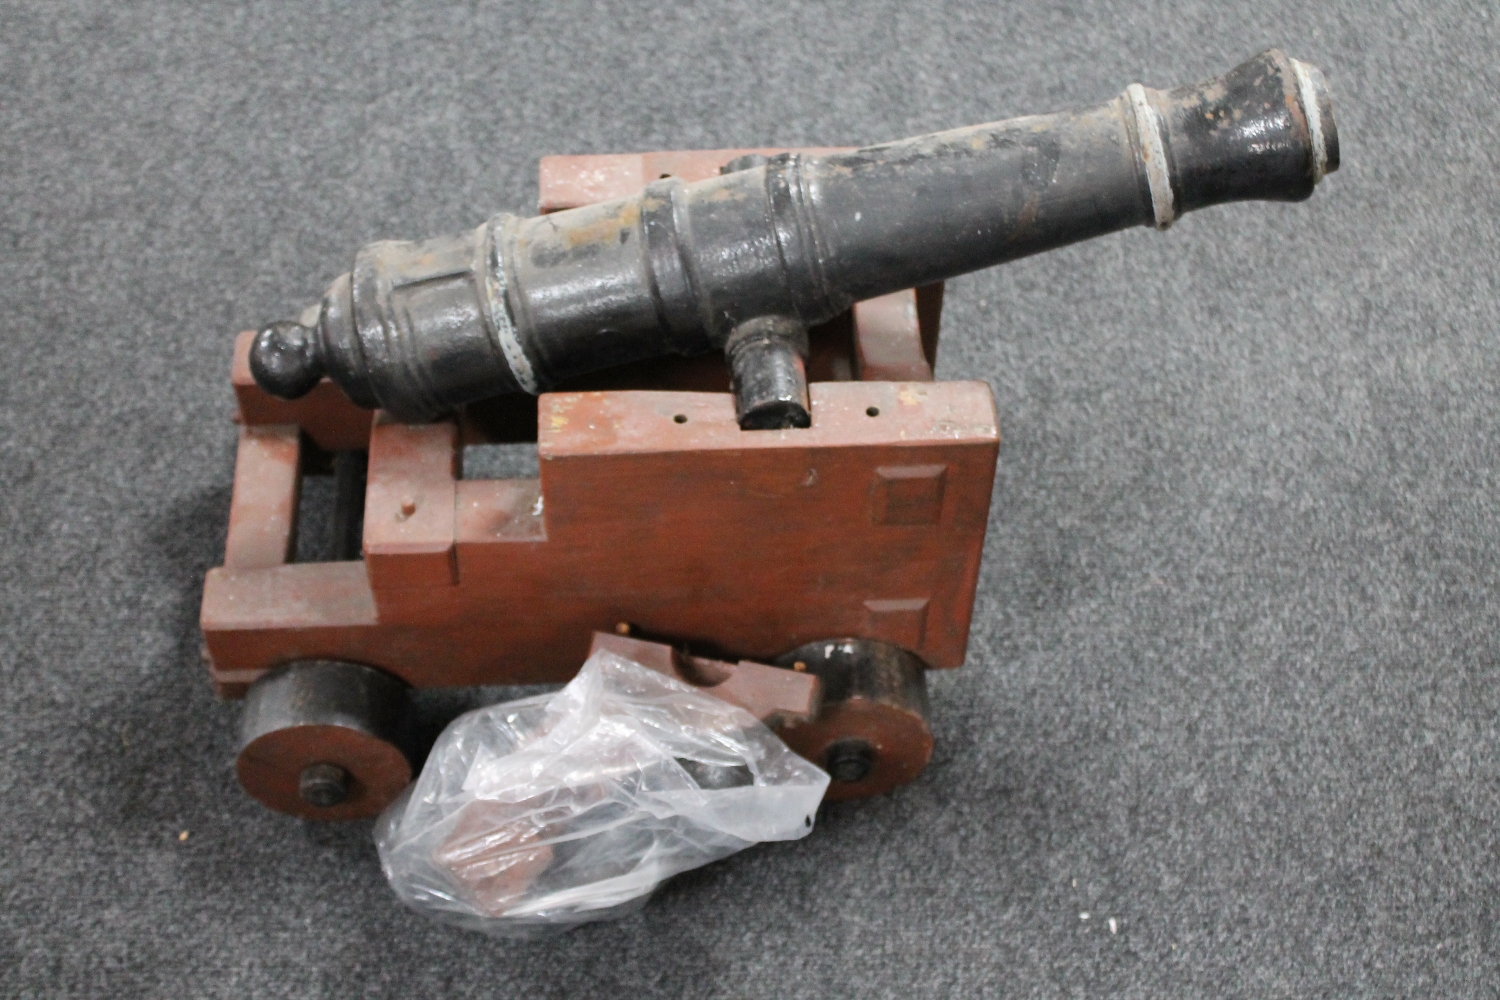 A replica metal ship's cannon on wooden trolley and a bag of nine replica cannon balls